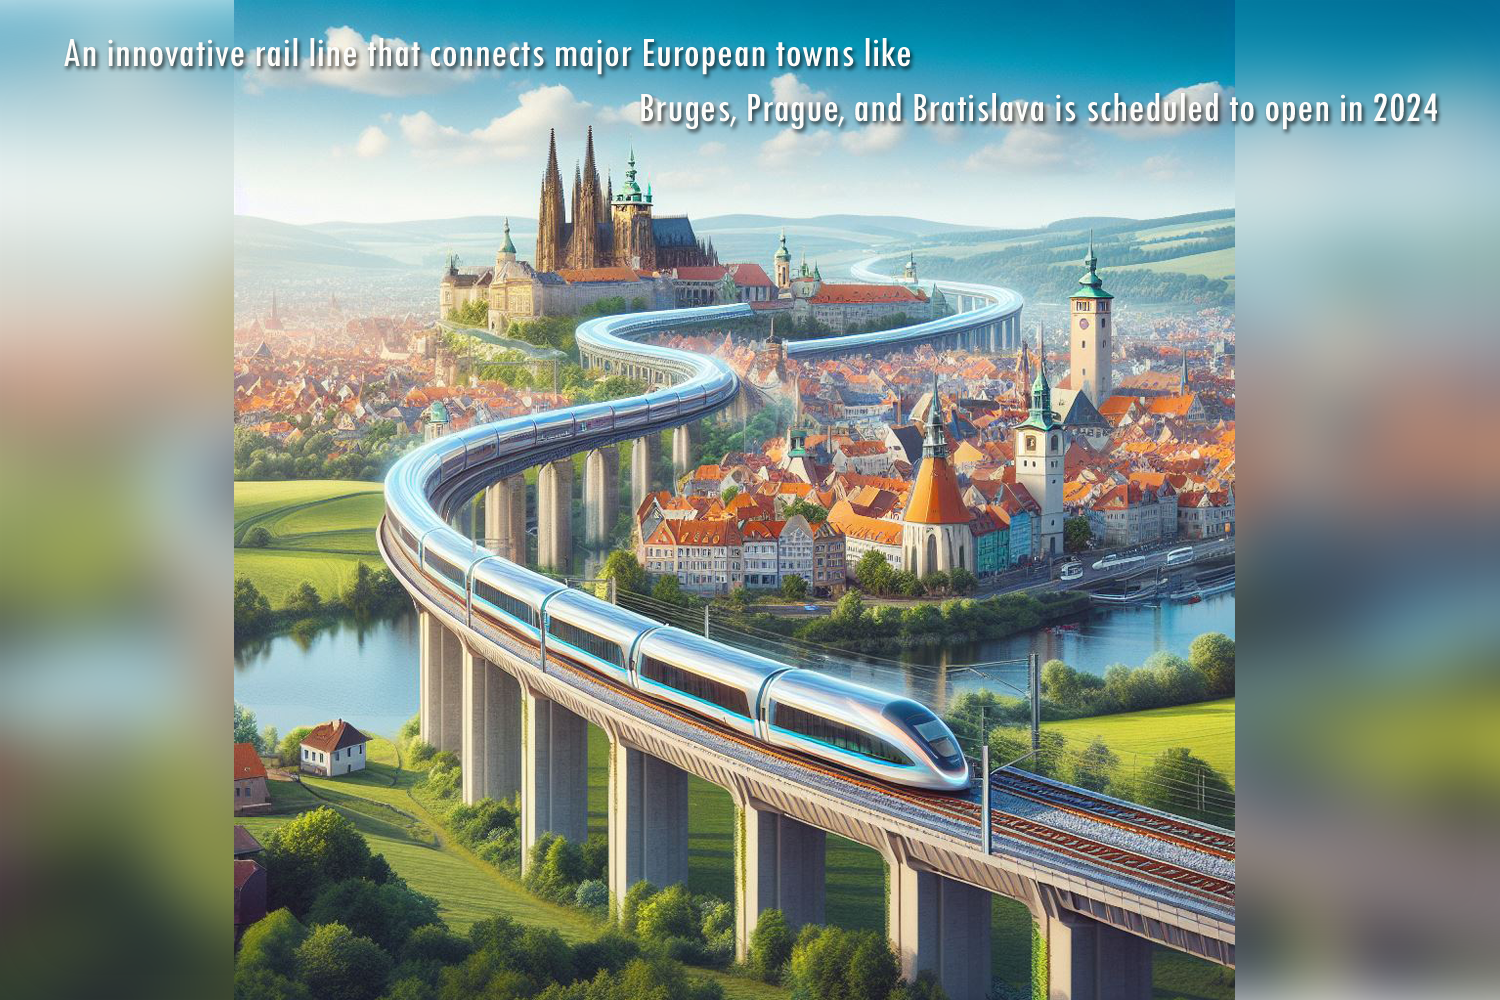 An innovative rail line that connects major European towns like Bruges, Prague, and Bratislava is scheduled to open in 2024.